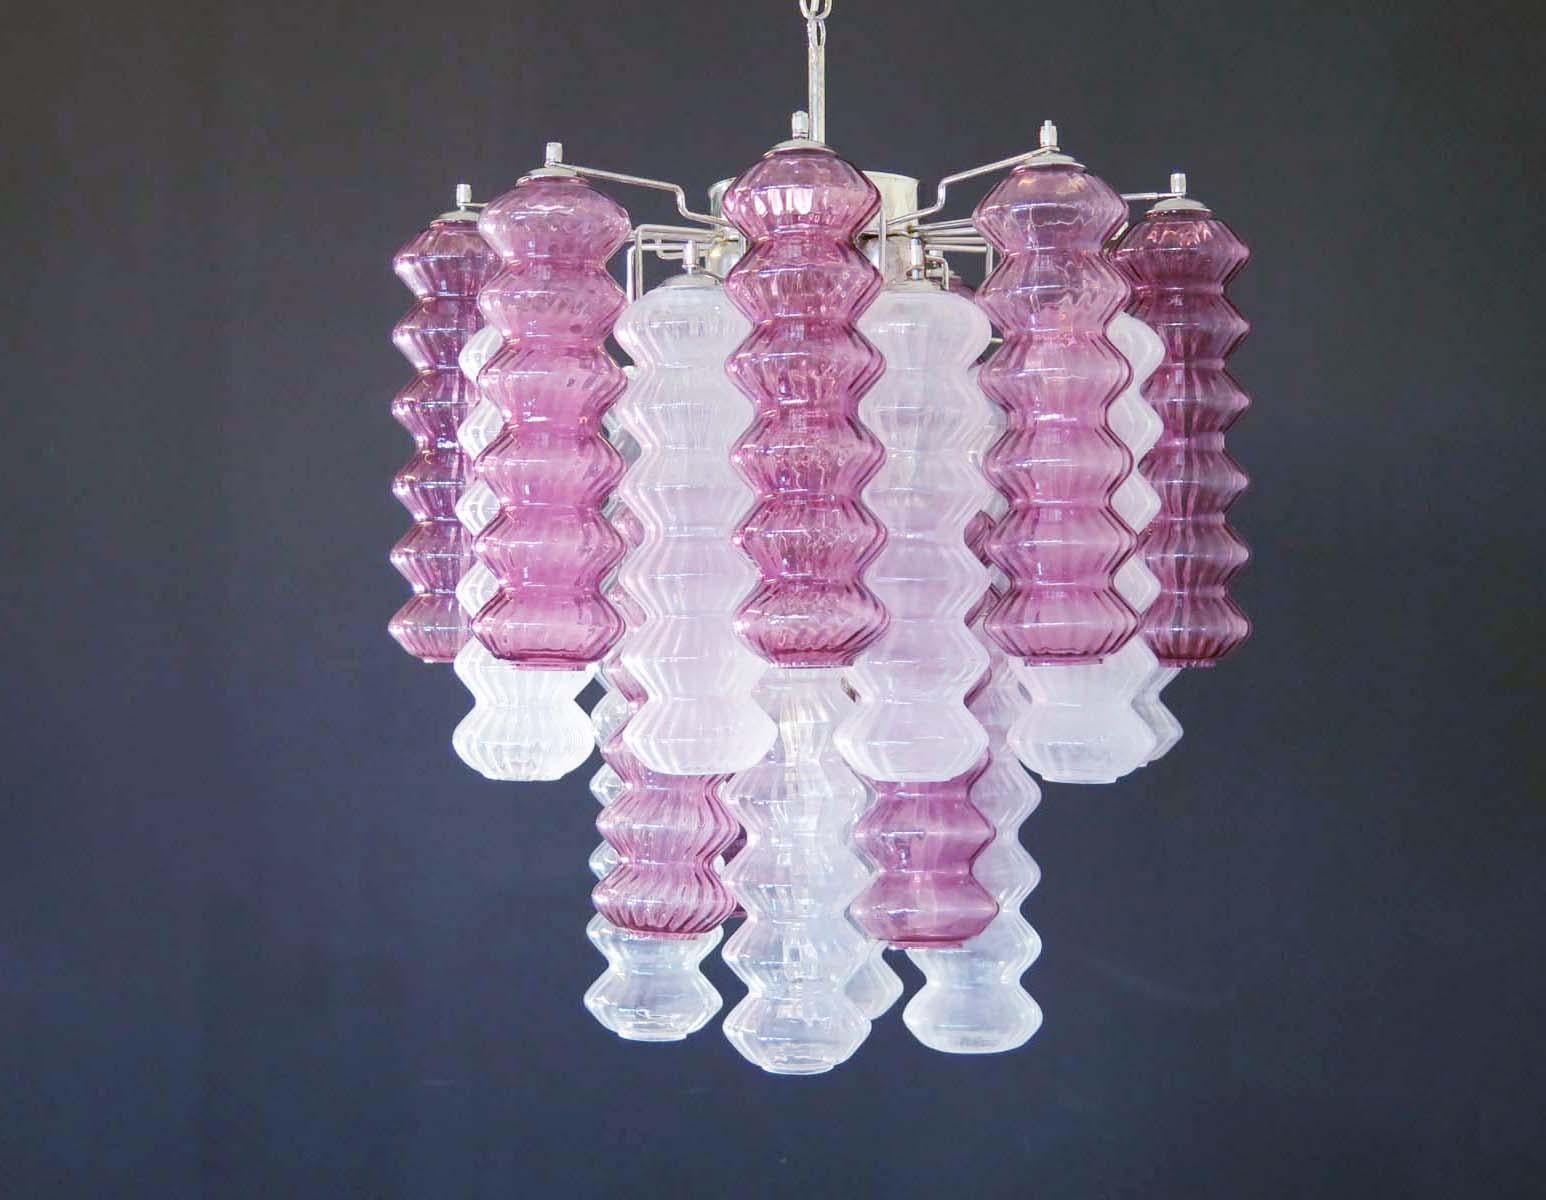 Rare Top Quality Murano Vintage Chandelier, Transparent and Purple Glass 6